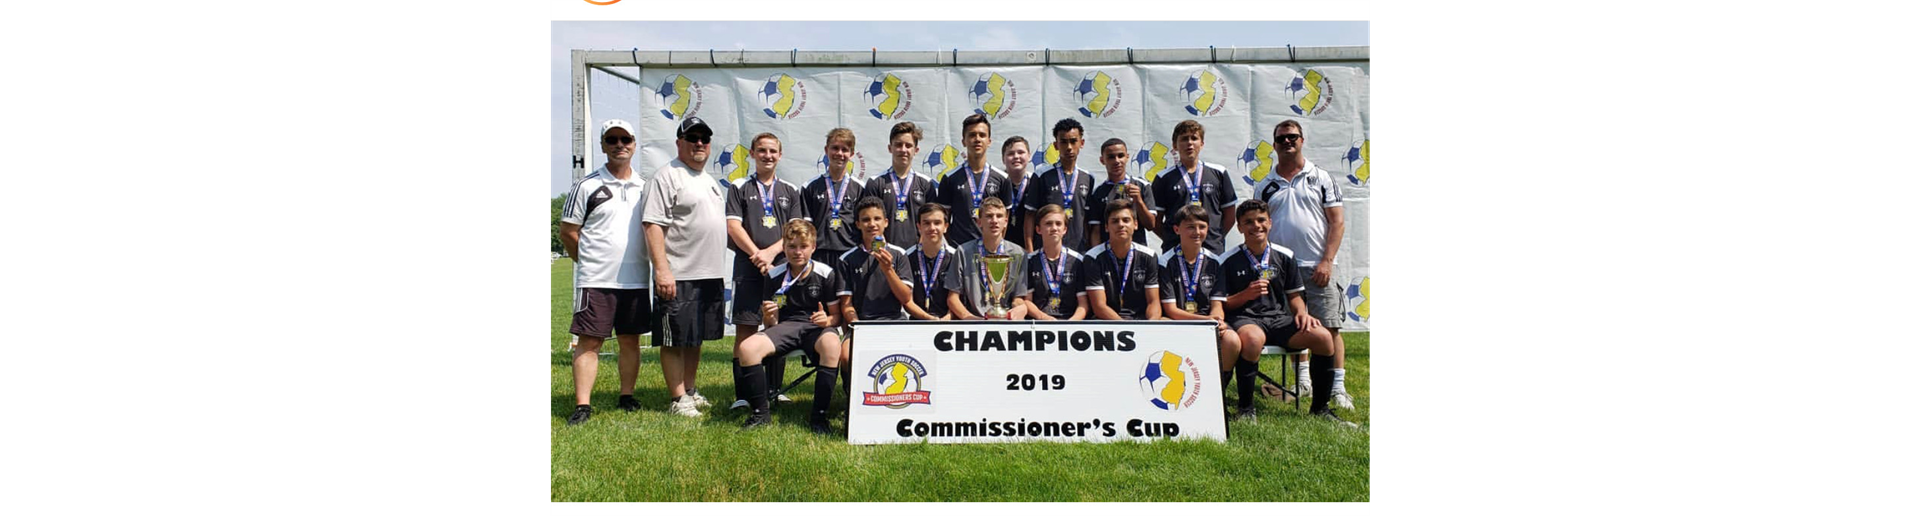 2019 Commissioners Cup State Champions